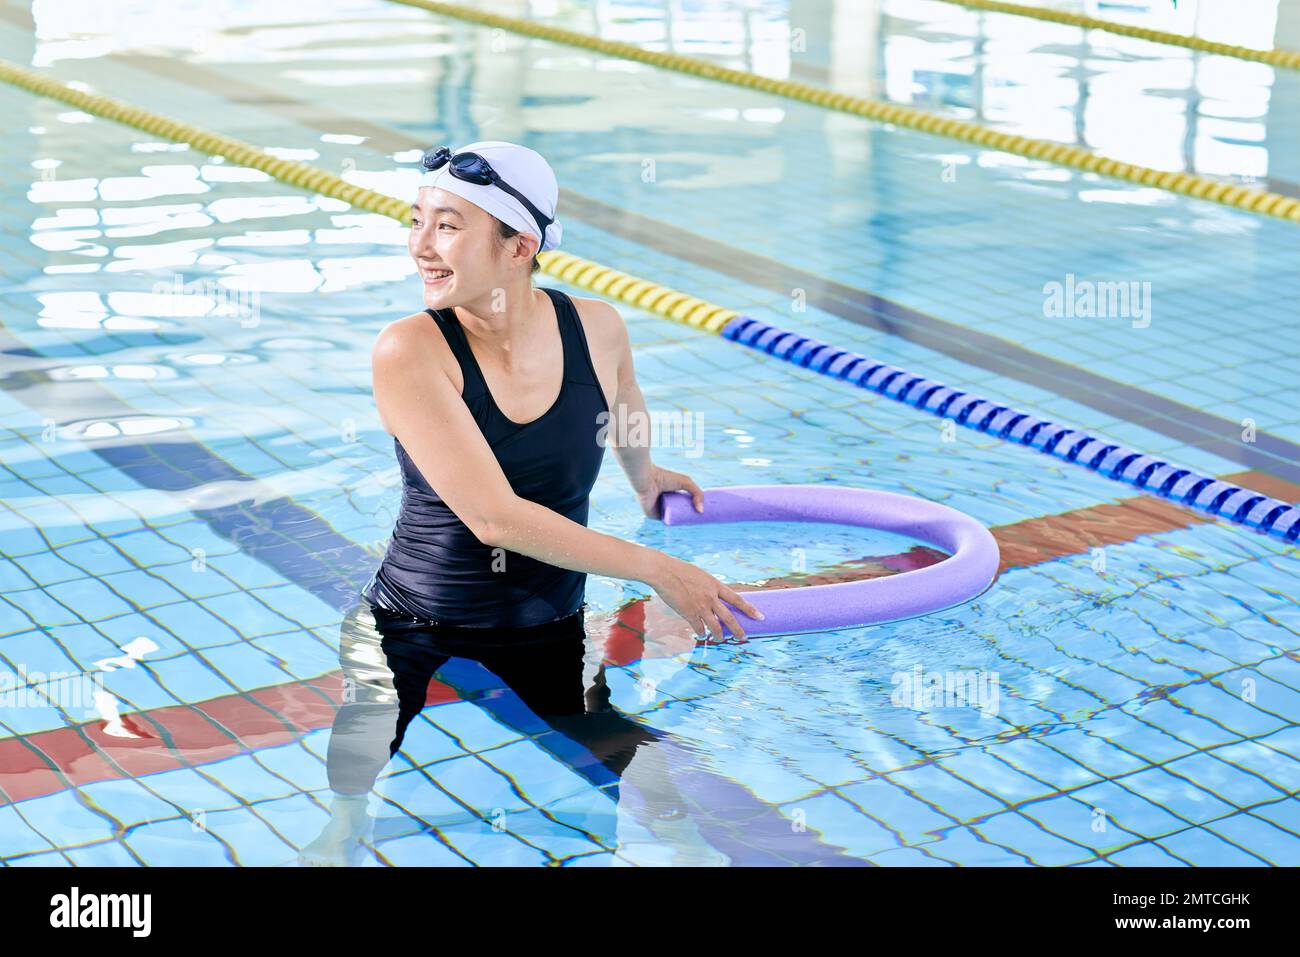 Japanese woman at indoor swimming pool Stock Photo